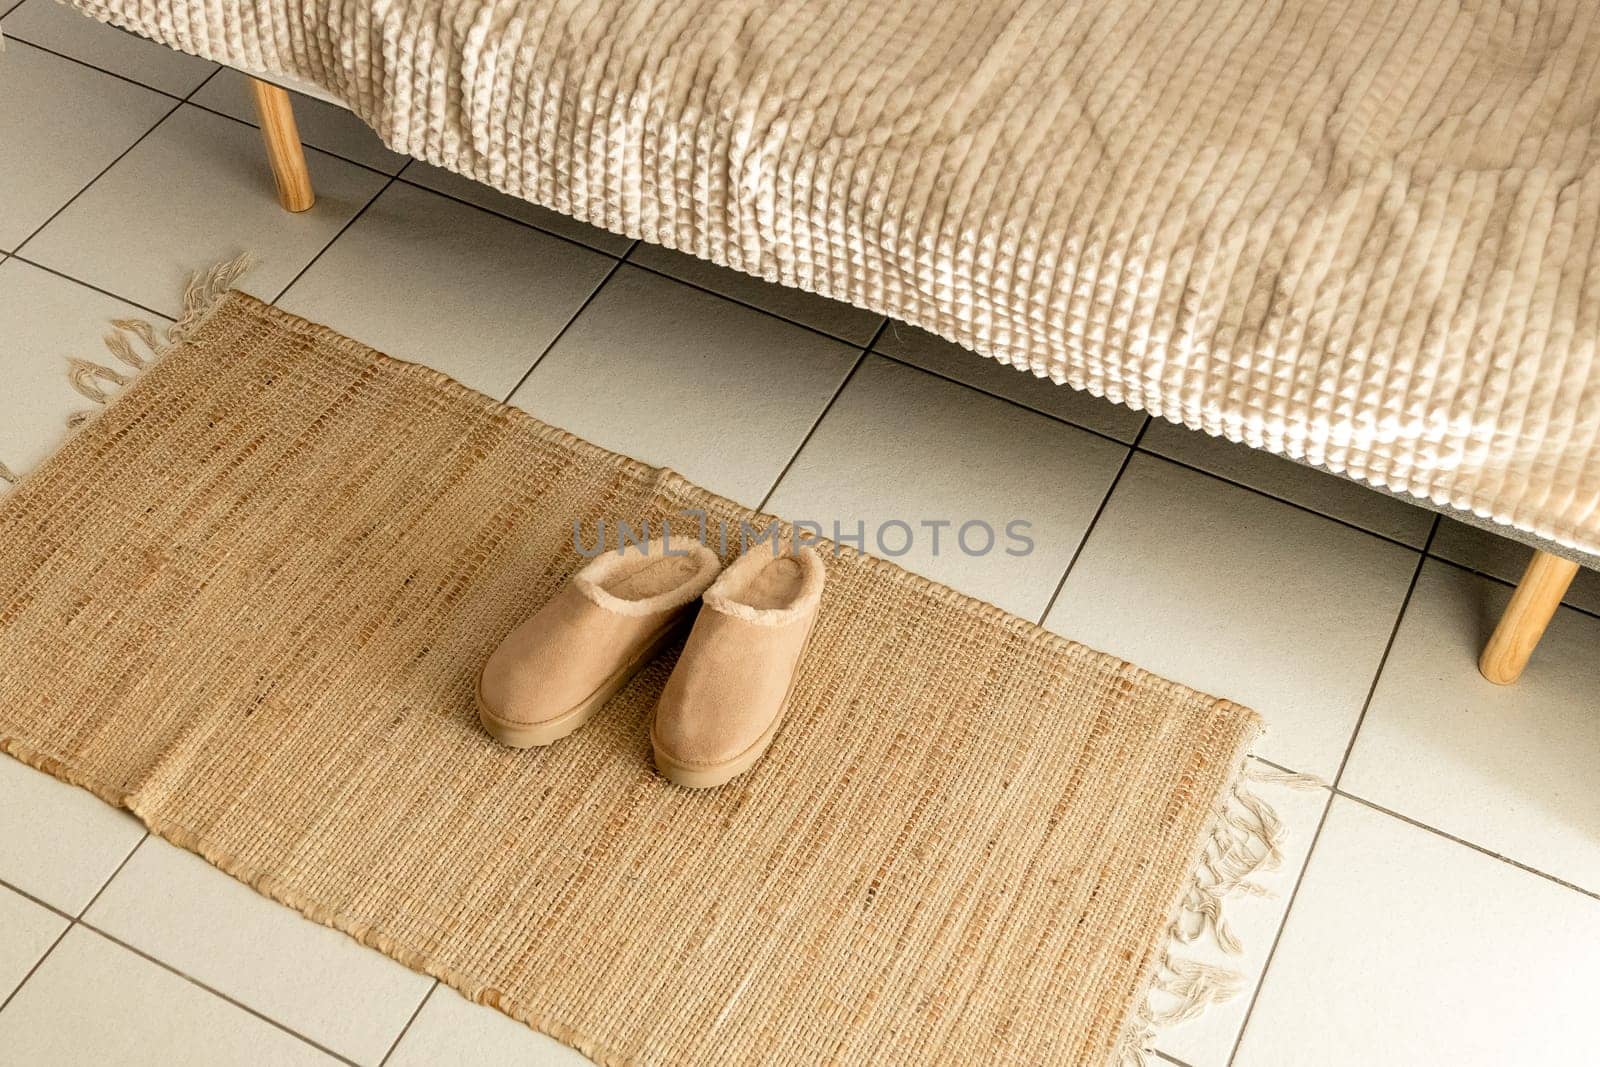 One pair of modern fashionable warm Uggs slippers lie in the center on a woven jute rug on a tiled floor near the sofa in the living room, close-up side view. Fashionable shoes concept.